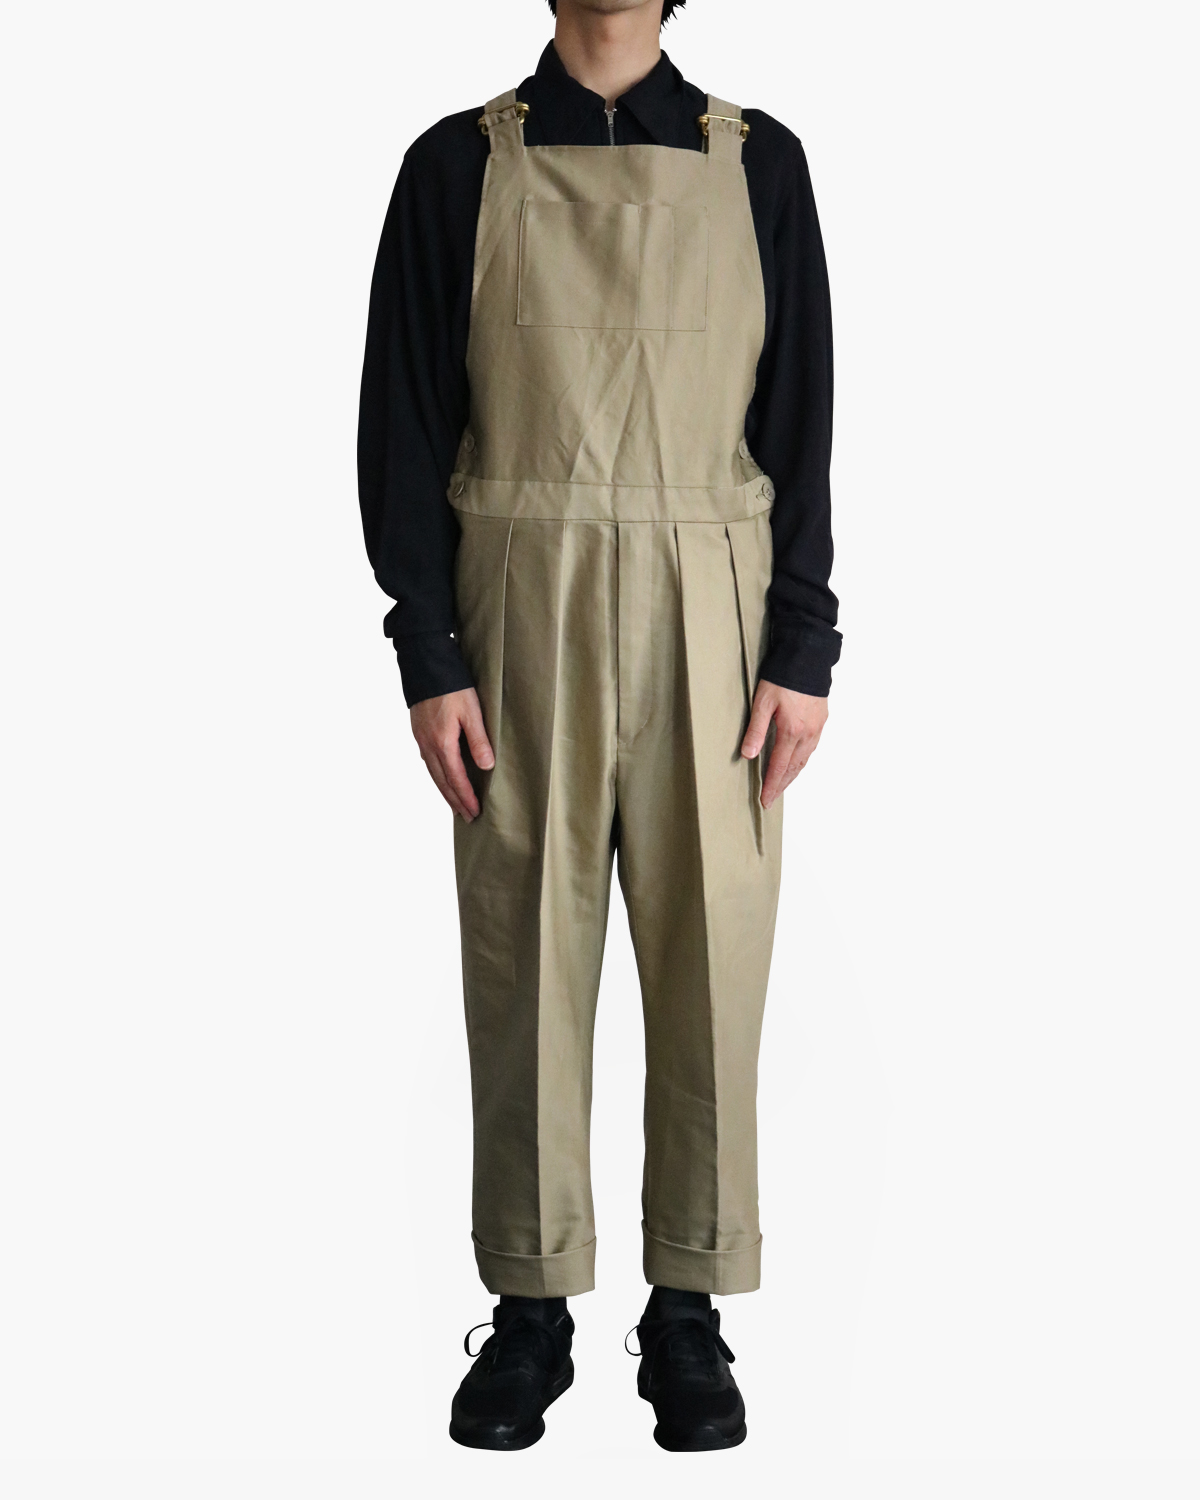 NEAT｜Moleskin｜OVERALL - BEIGE｜PRODUCT｜Continuer Inc.｜メガネ 